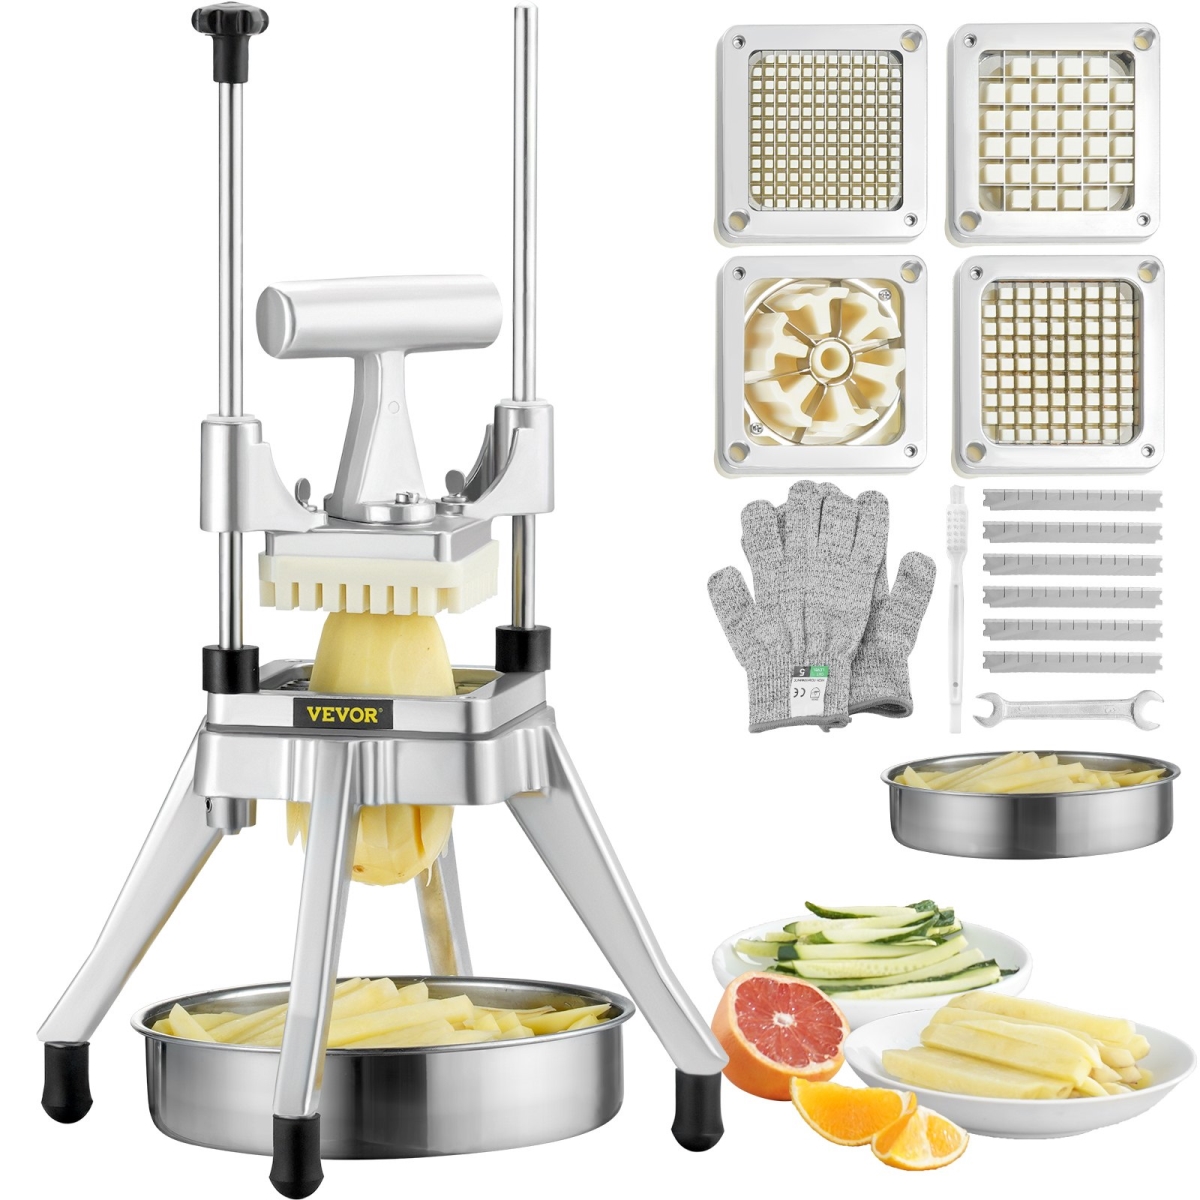 Picture of Vevor GGSSDQTJJB412RXV9V0 Commercial Vegetable Fruit Chopper&#44; Stainless Steel French Fry Cutter with 4 Blades - 0.25 x 0.37 x 0.50 in.